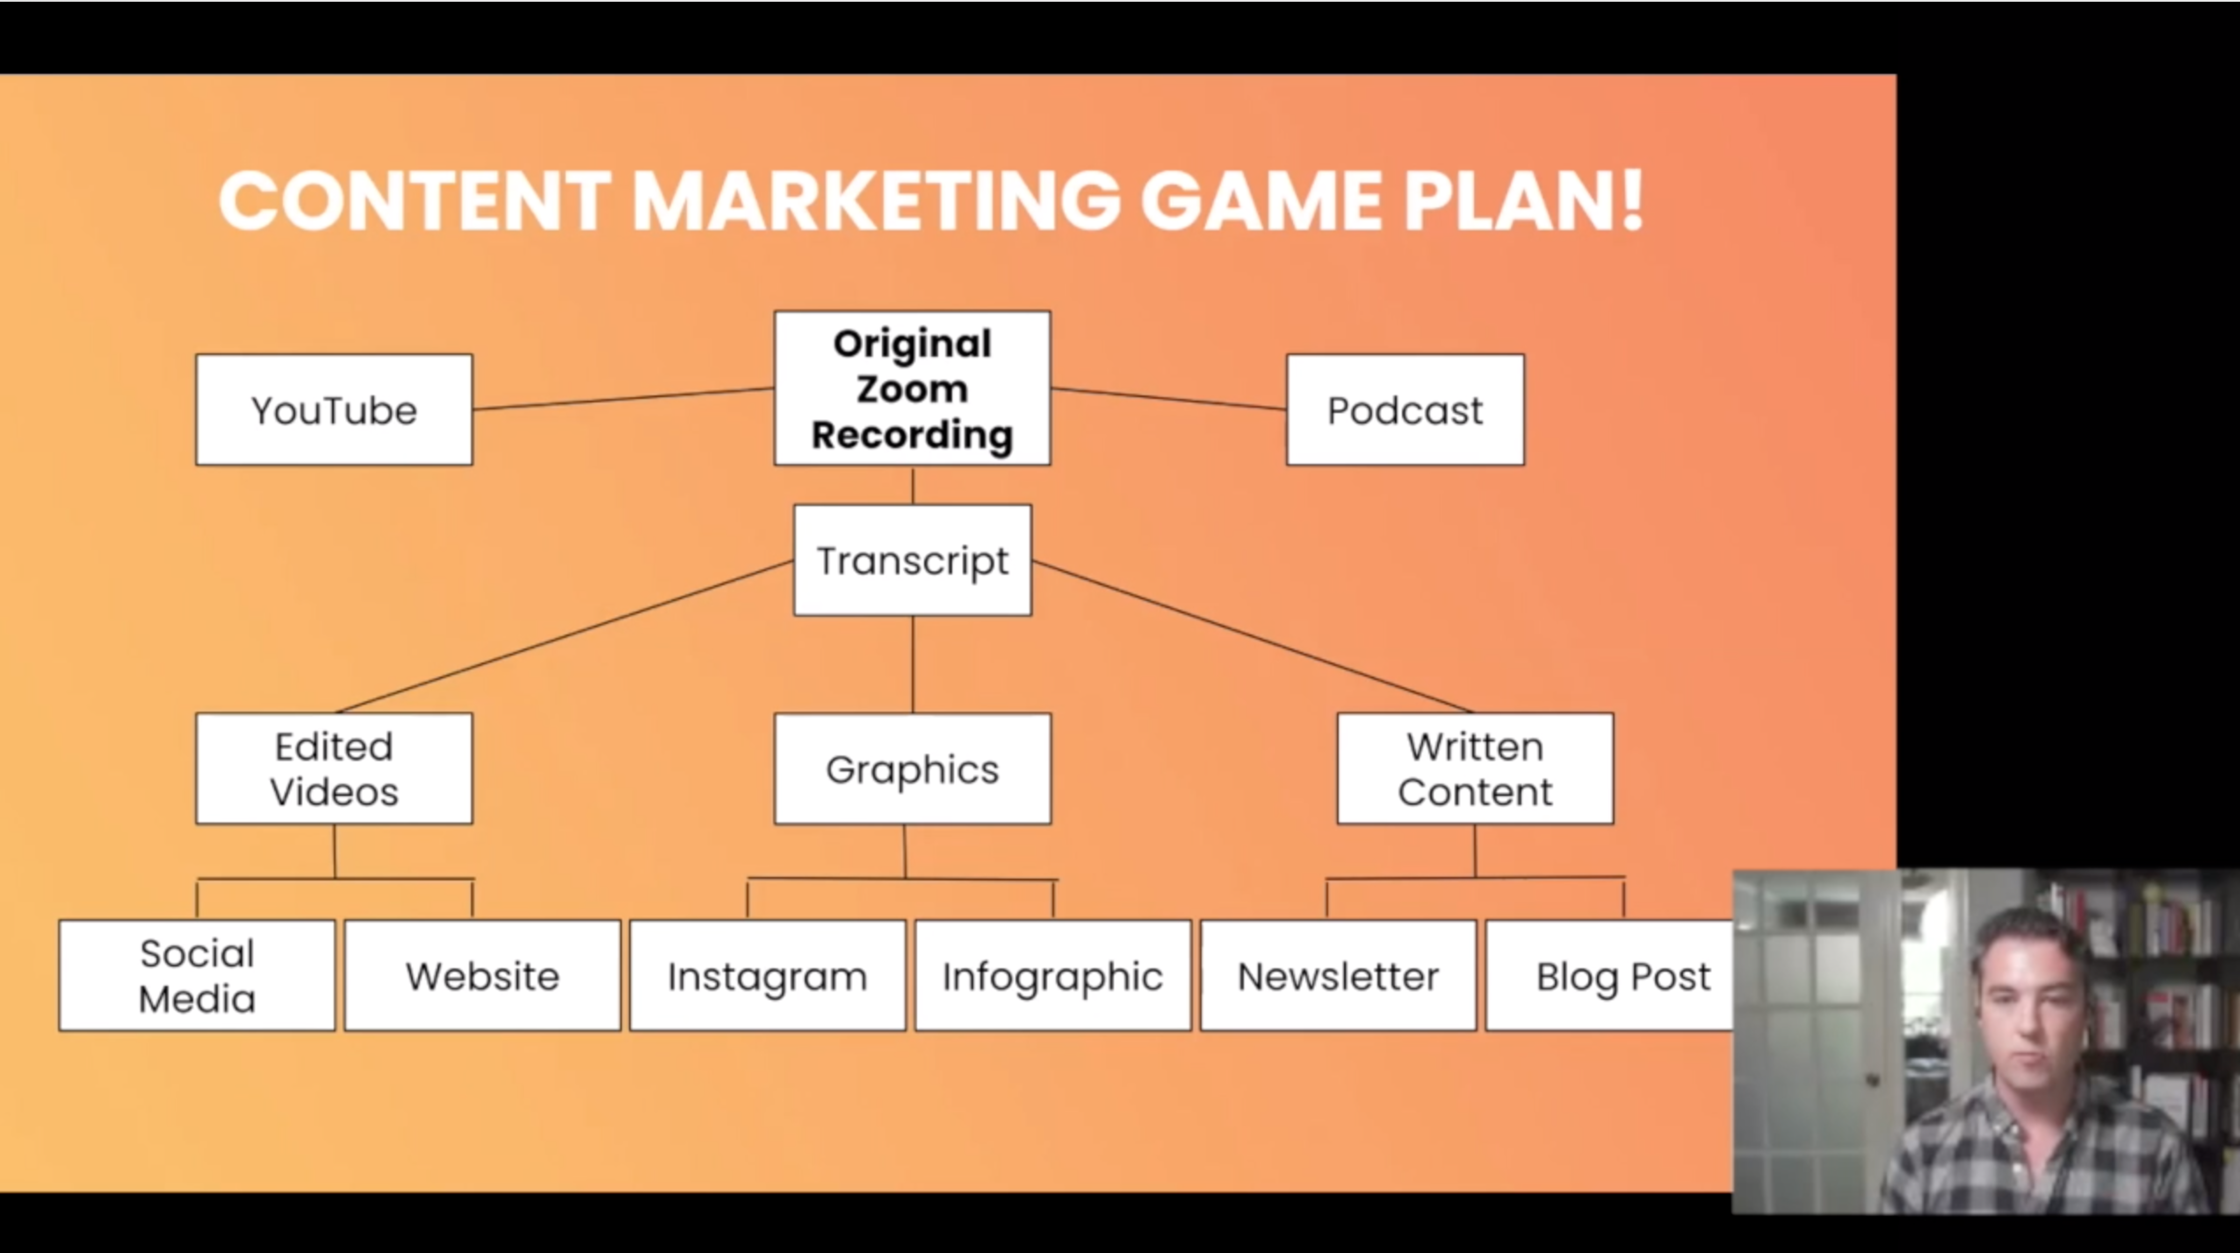 I think this content creation flow chart is a great visual